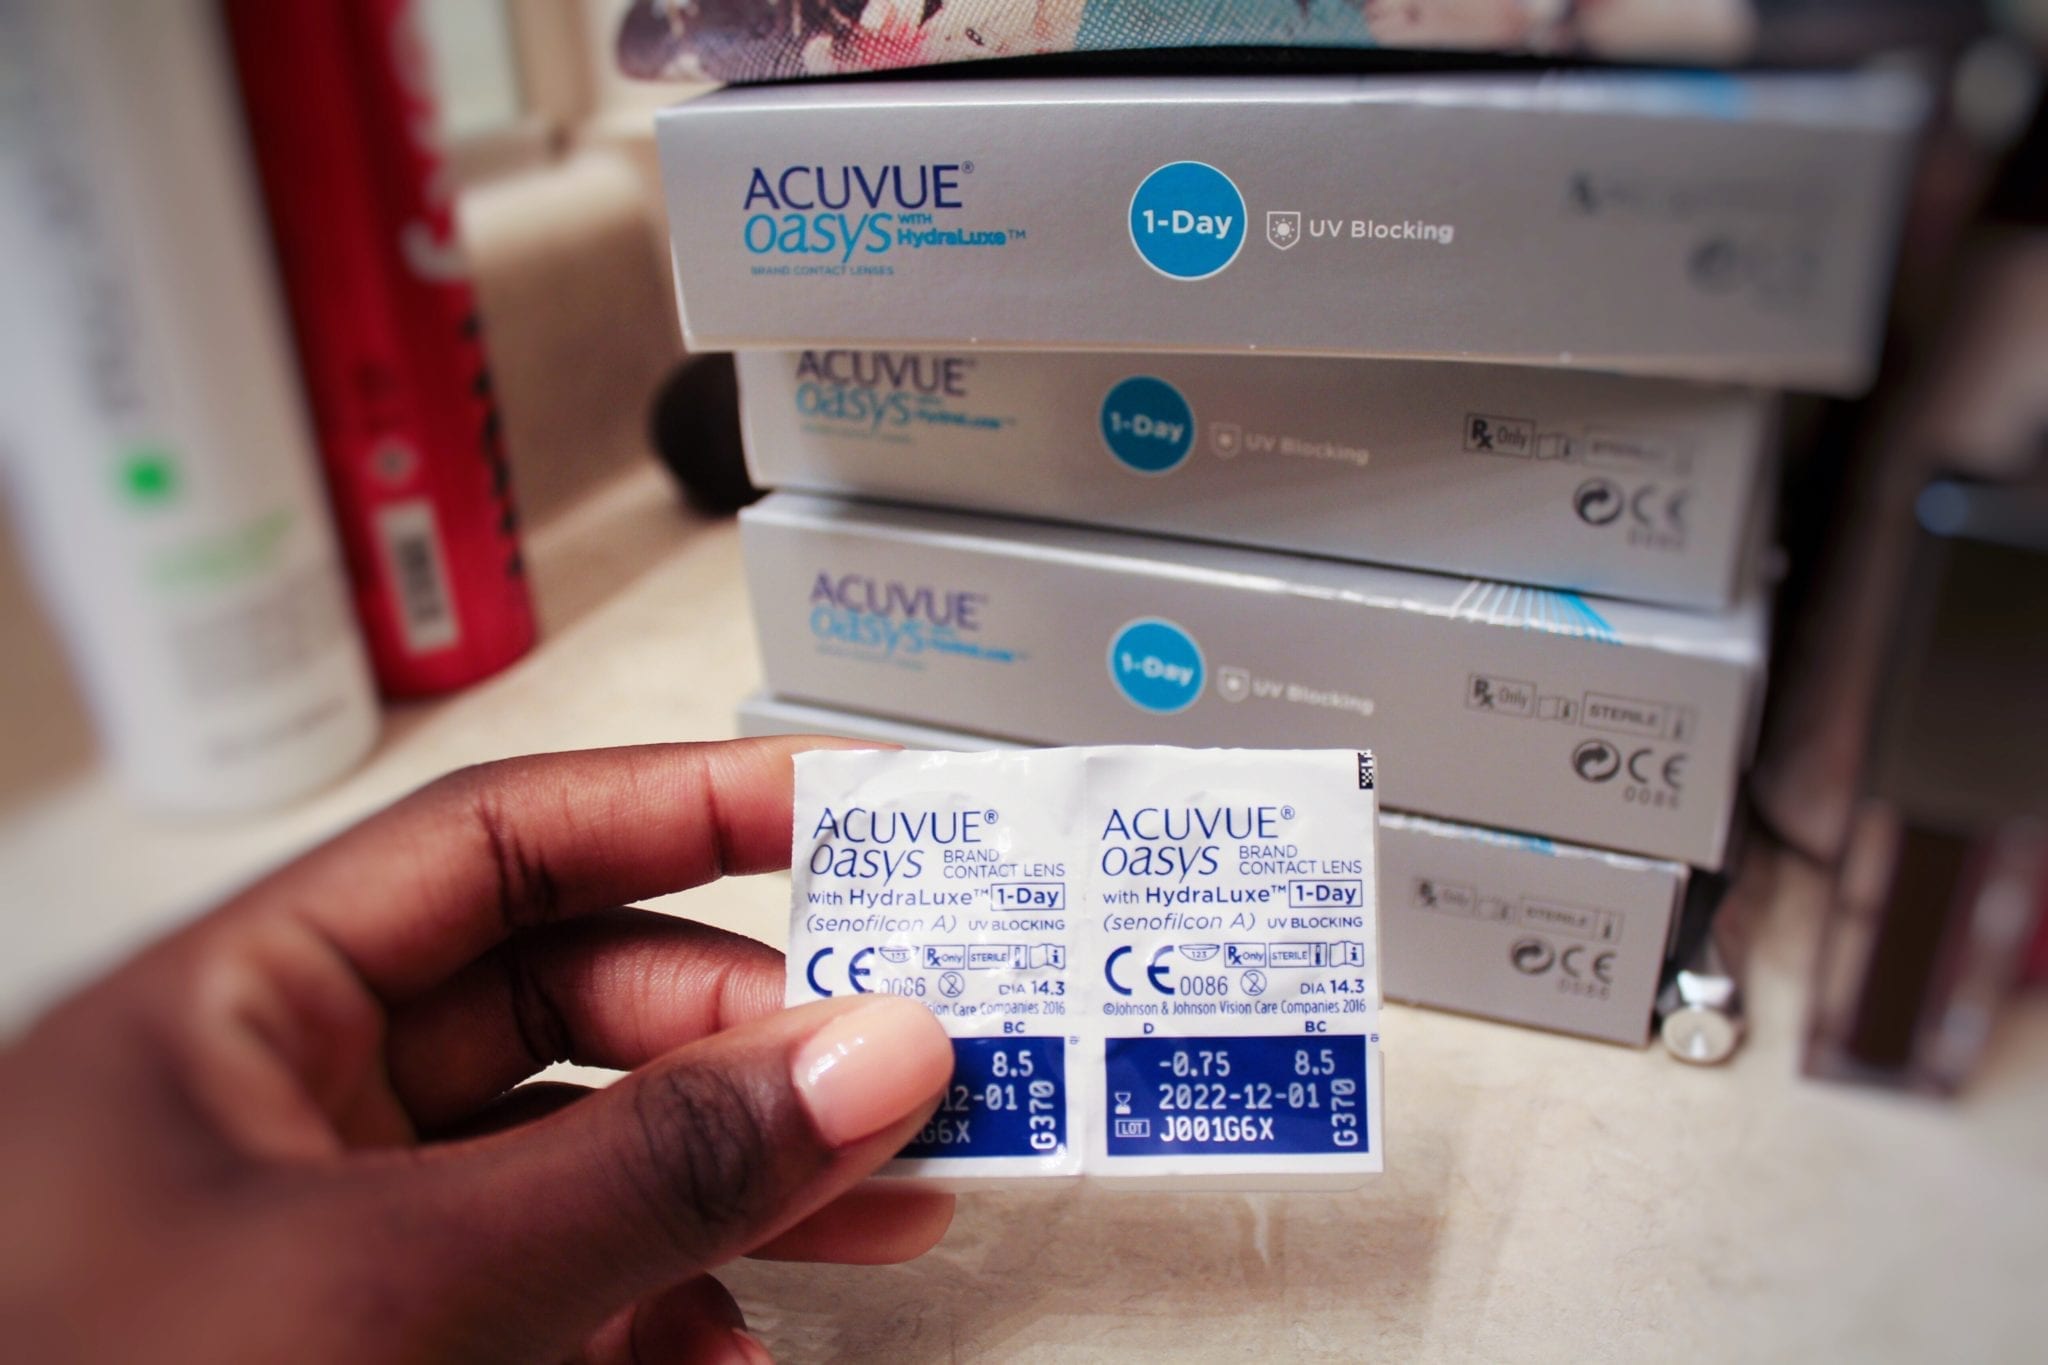 Ready to make the switch from glasses to contact lenses? I'm sharing my experience with Acuvue and how I dealt with contact lenses with my sensitive eyes. More on the blog! GoodTomiCha.com